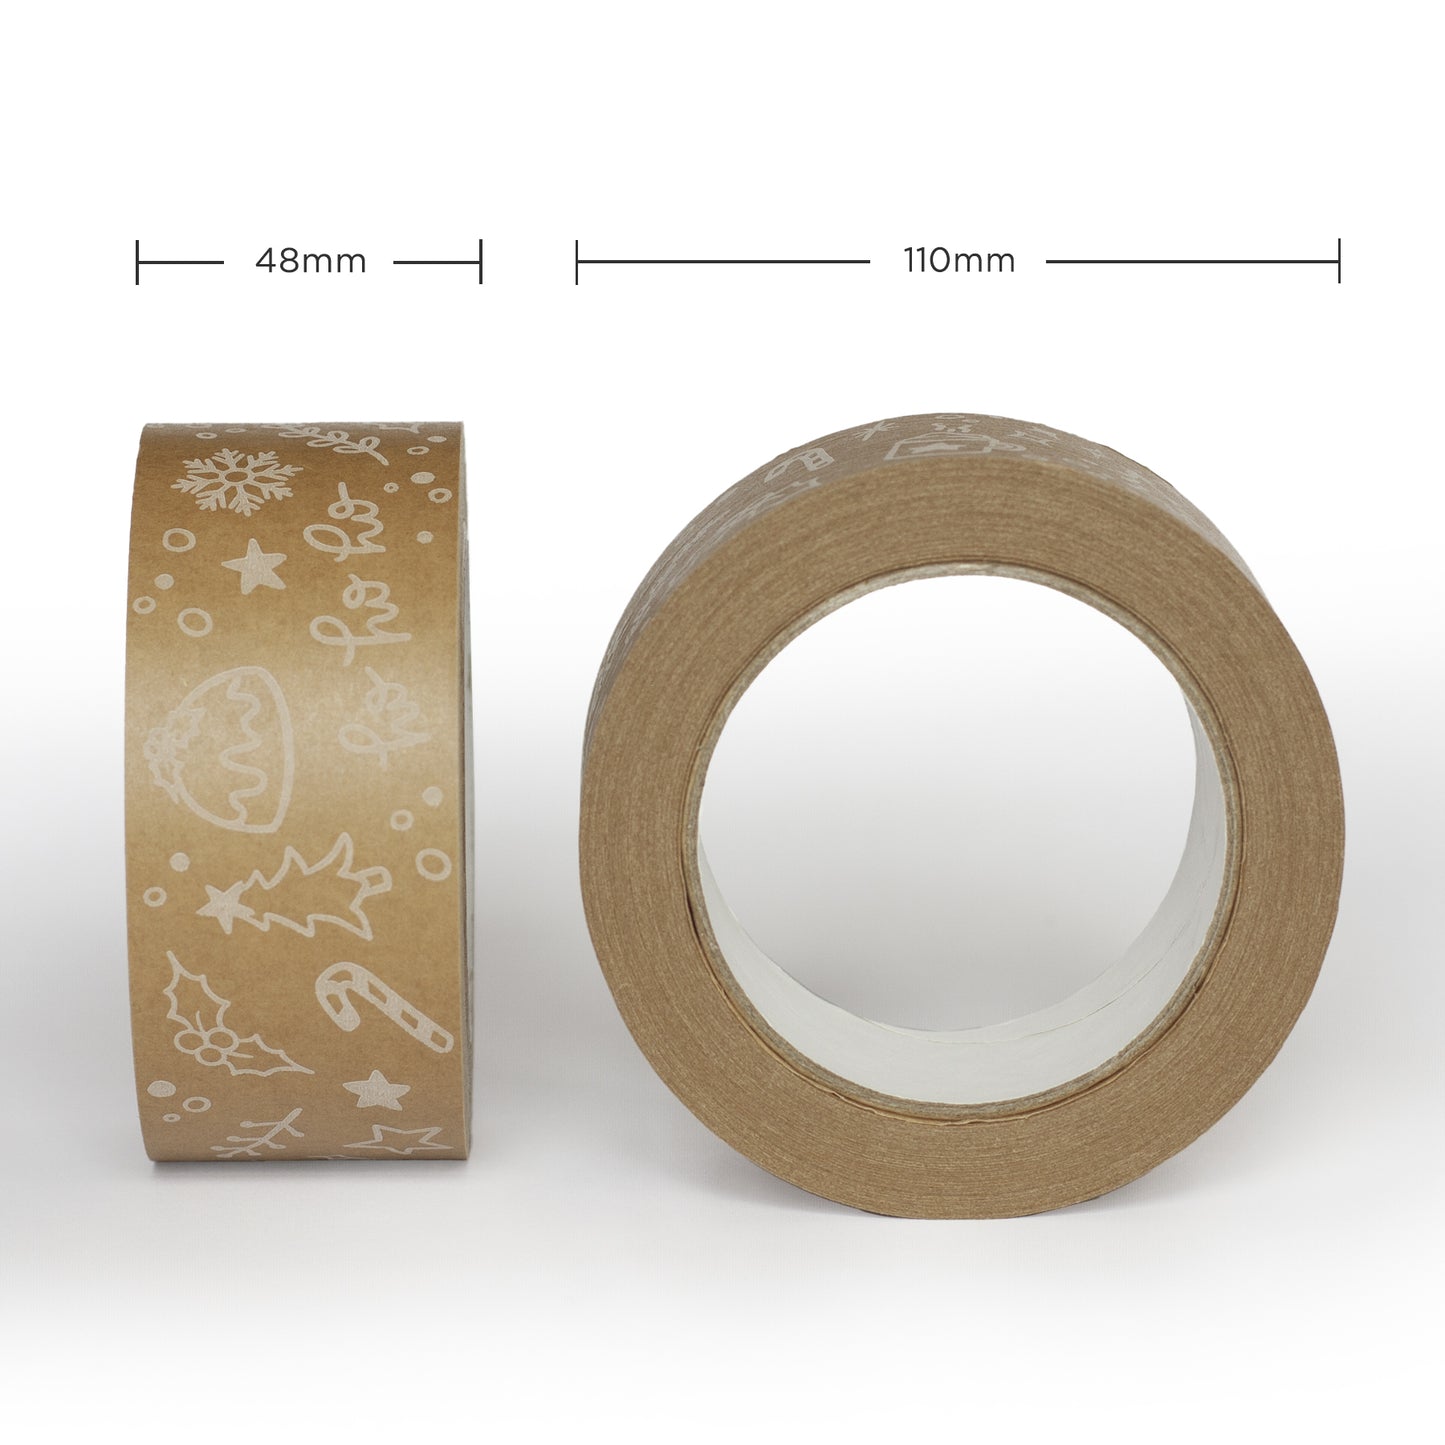 Christmas packing tapes, Printed 50 metres length, 48mm width recycled paper